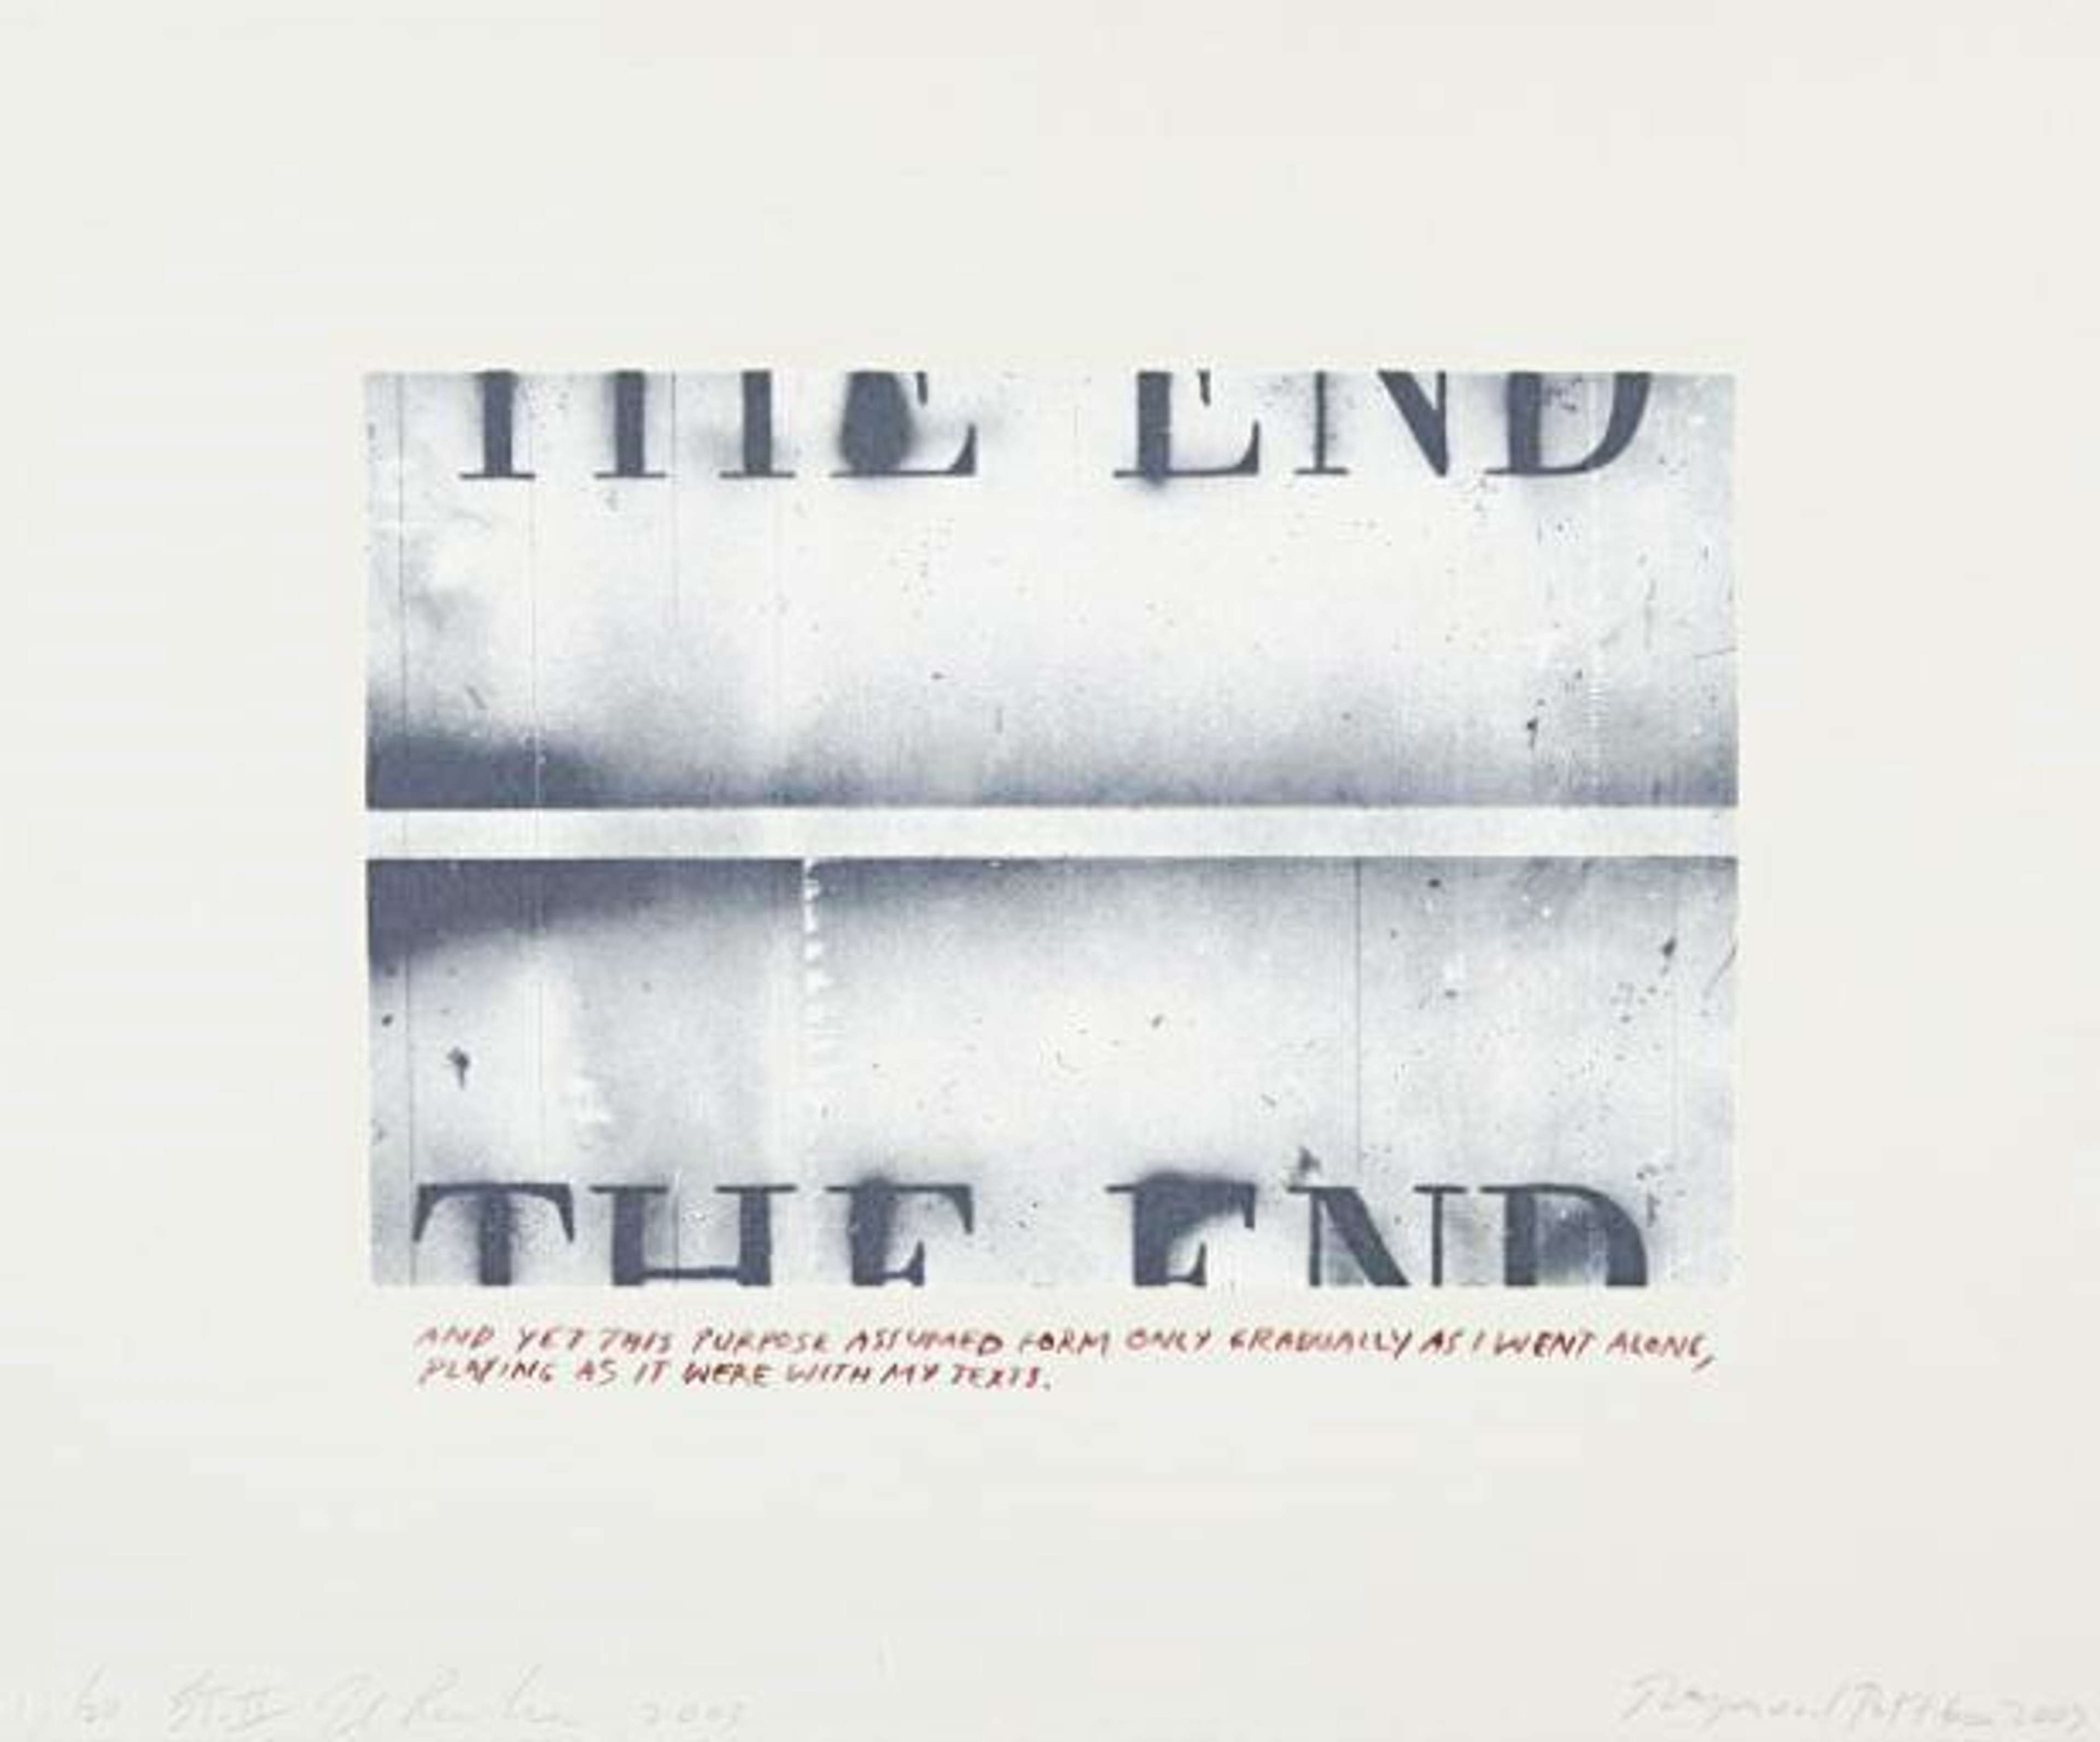 This print shows the words THE END, split in half at the top and bottom of the composition. The colour palette is monochrome.